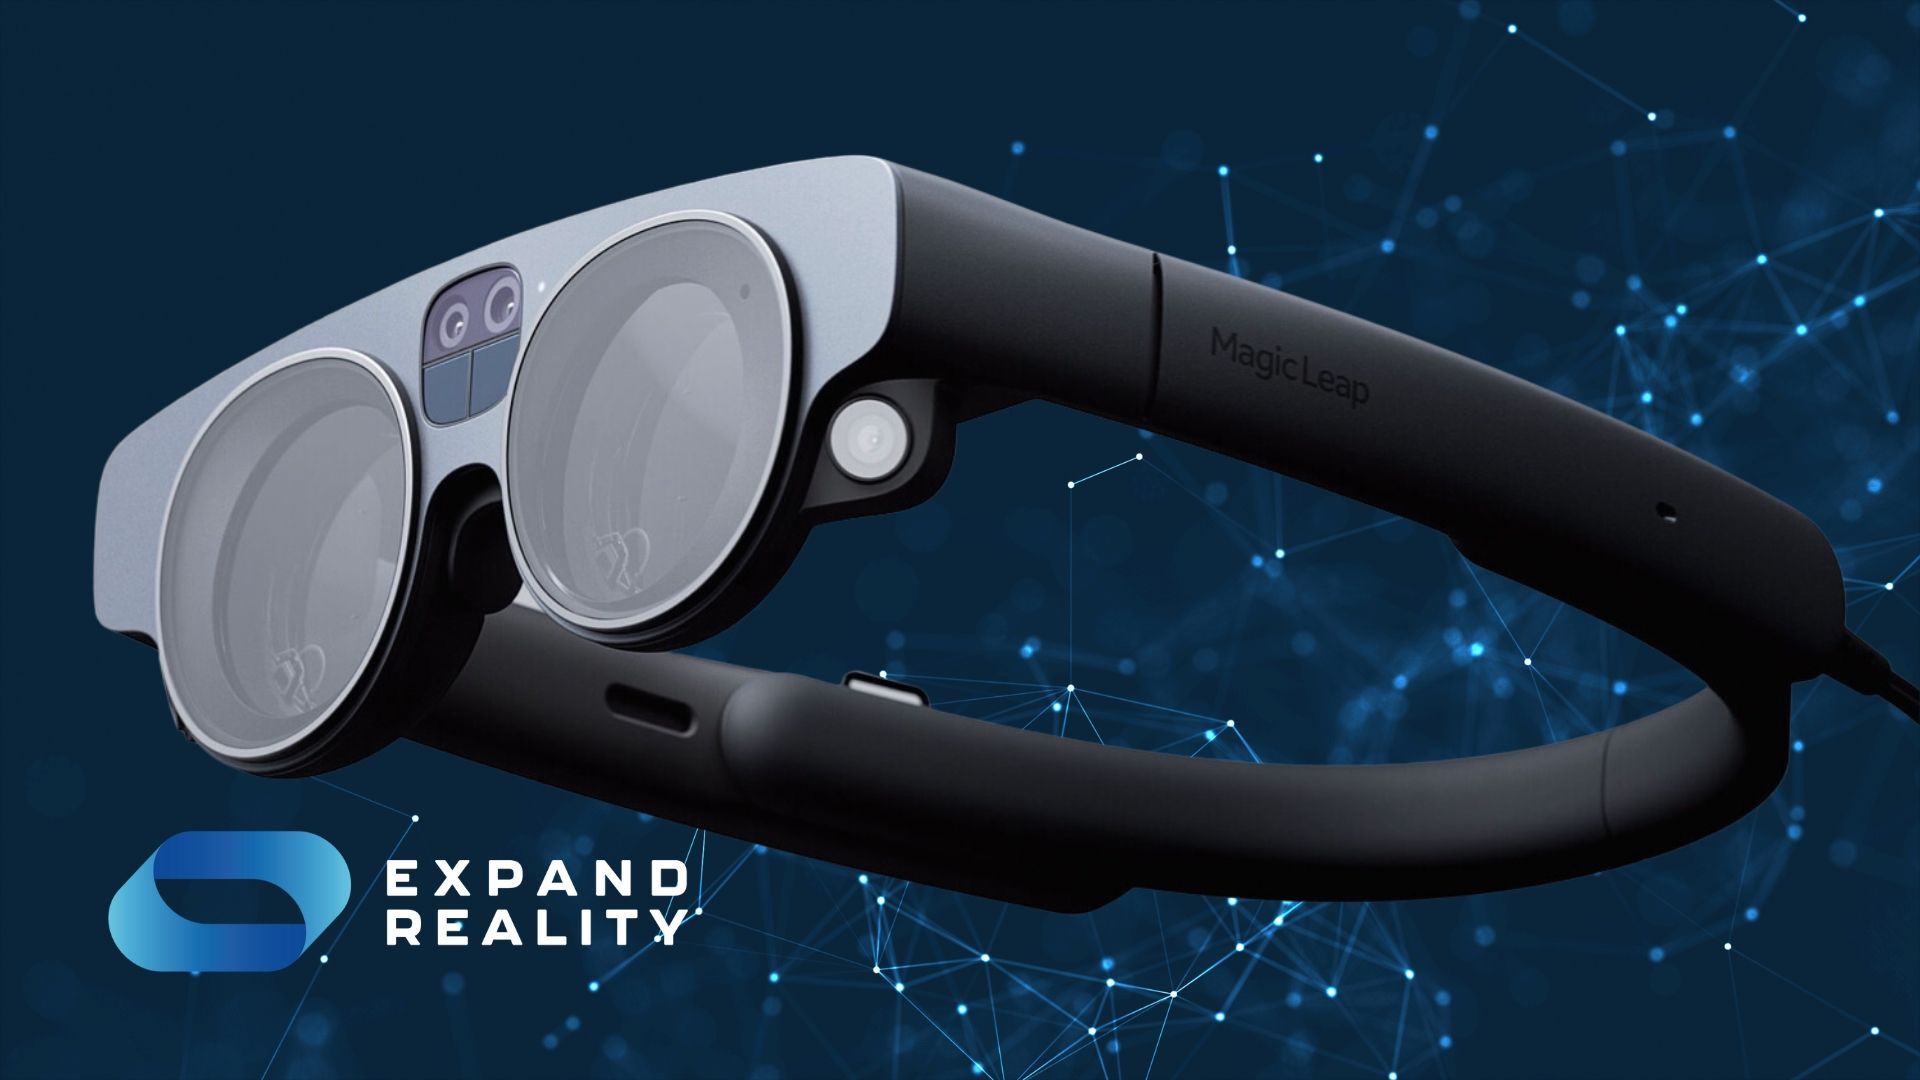 Magic Leap 2 is an AR headset that's built for use in manufacturing, healthcare, defence and other industries. Find out more about its use cases.